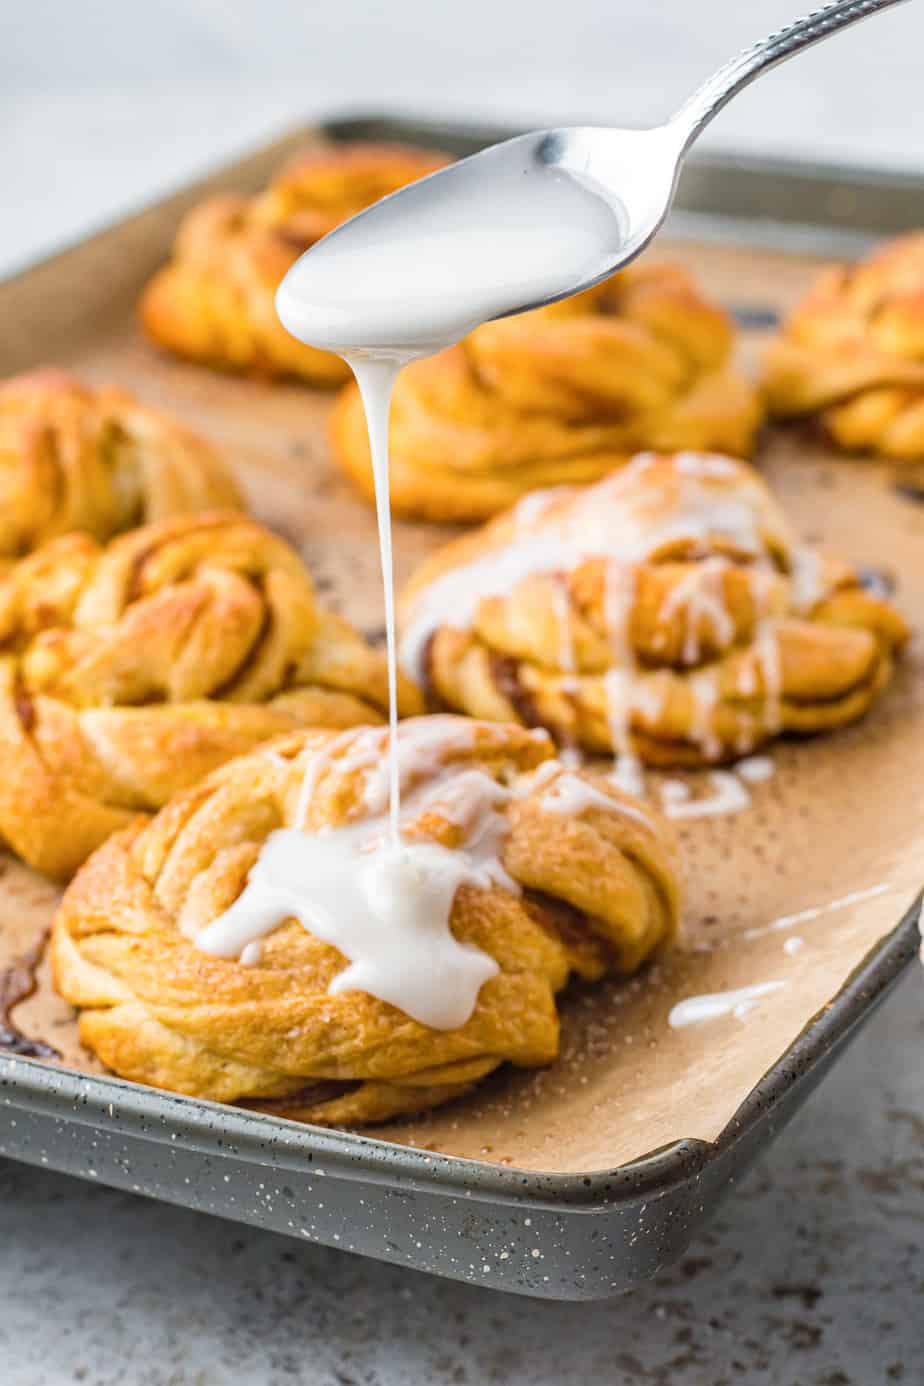 A spoon drizzles icing over a pumpkin crescent roll twist on a pan from the side.